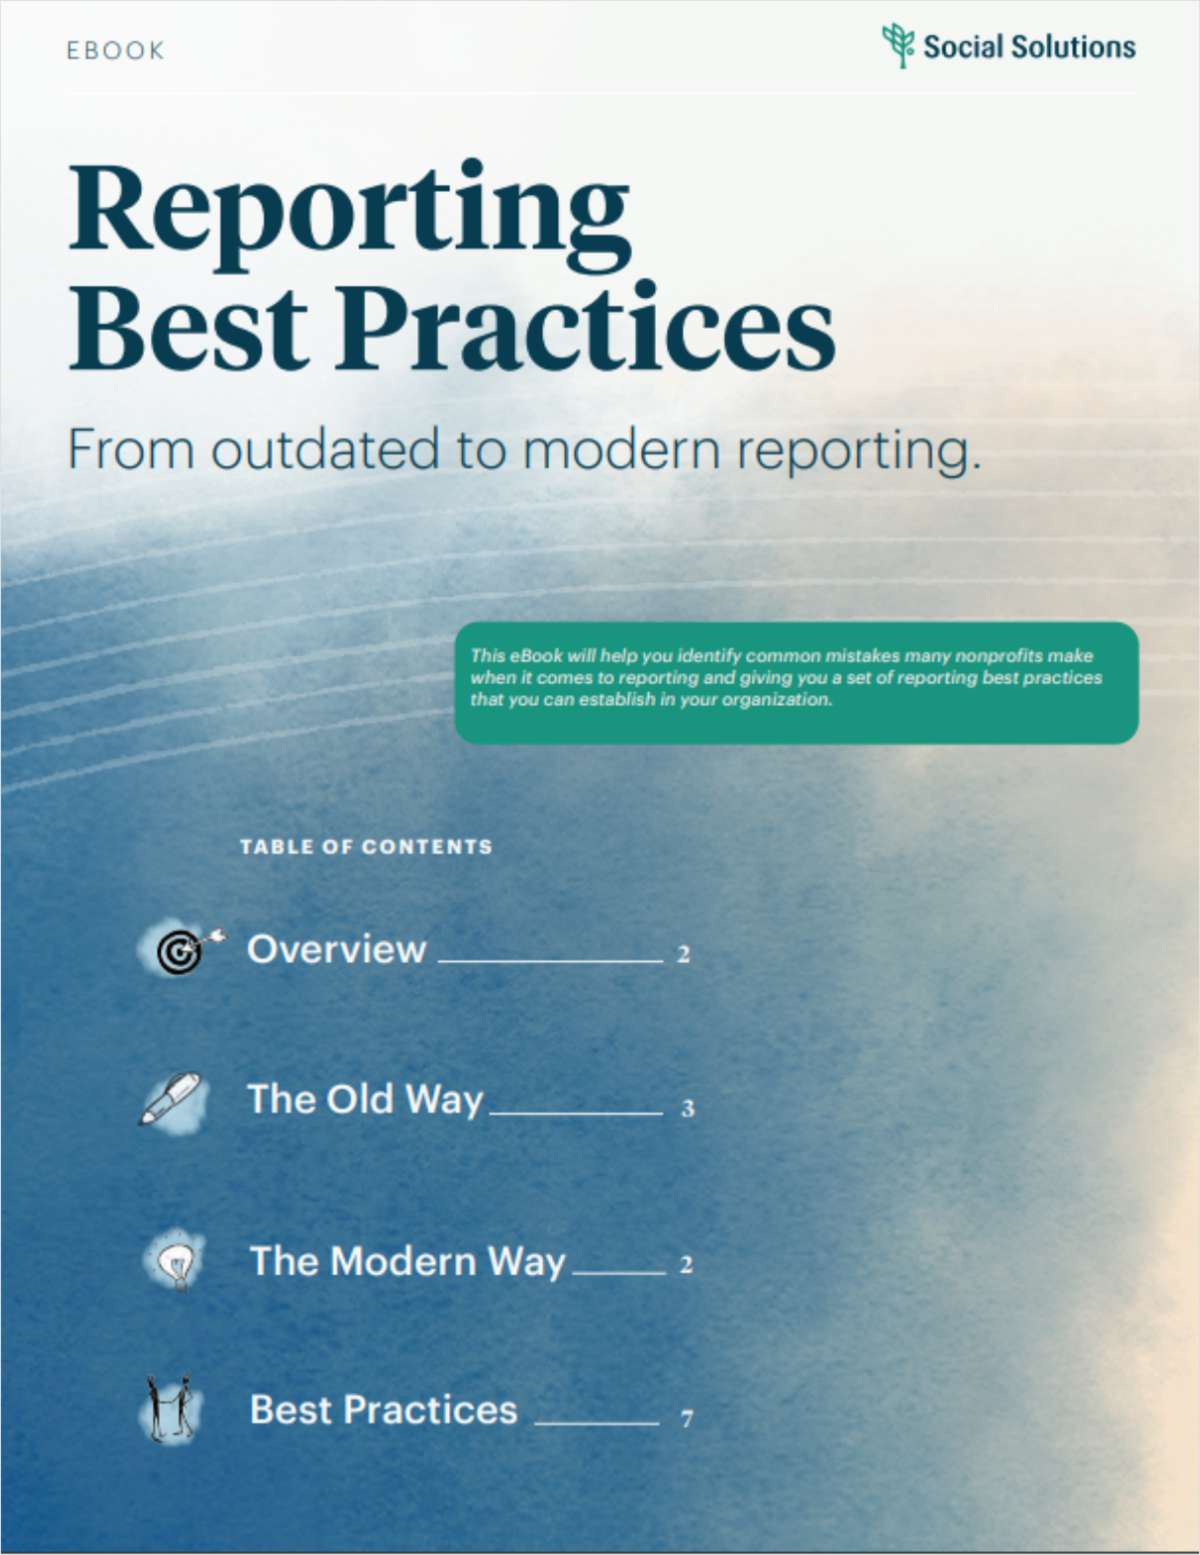 Reporting Best Practices